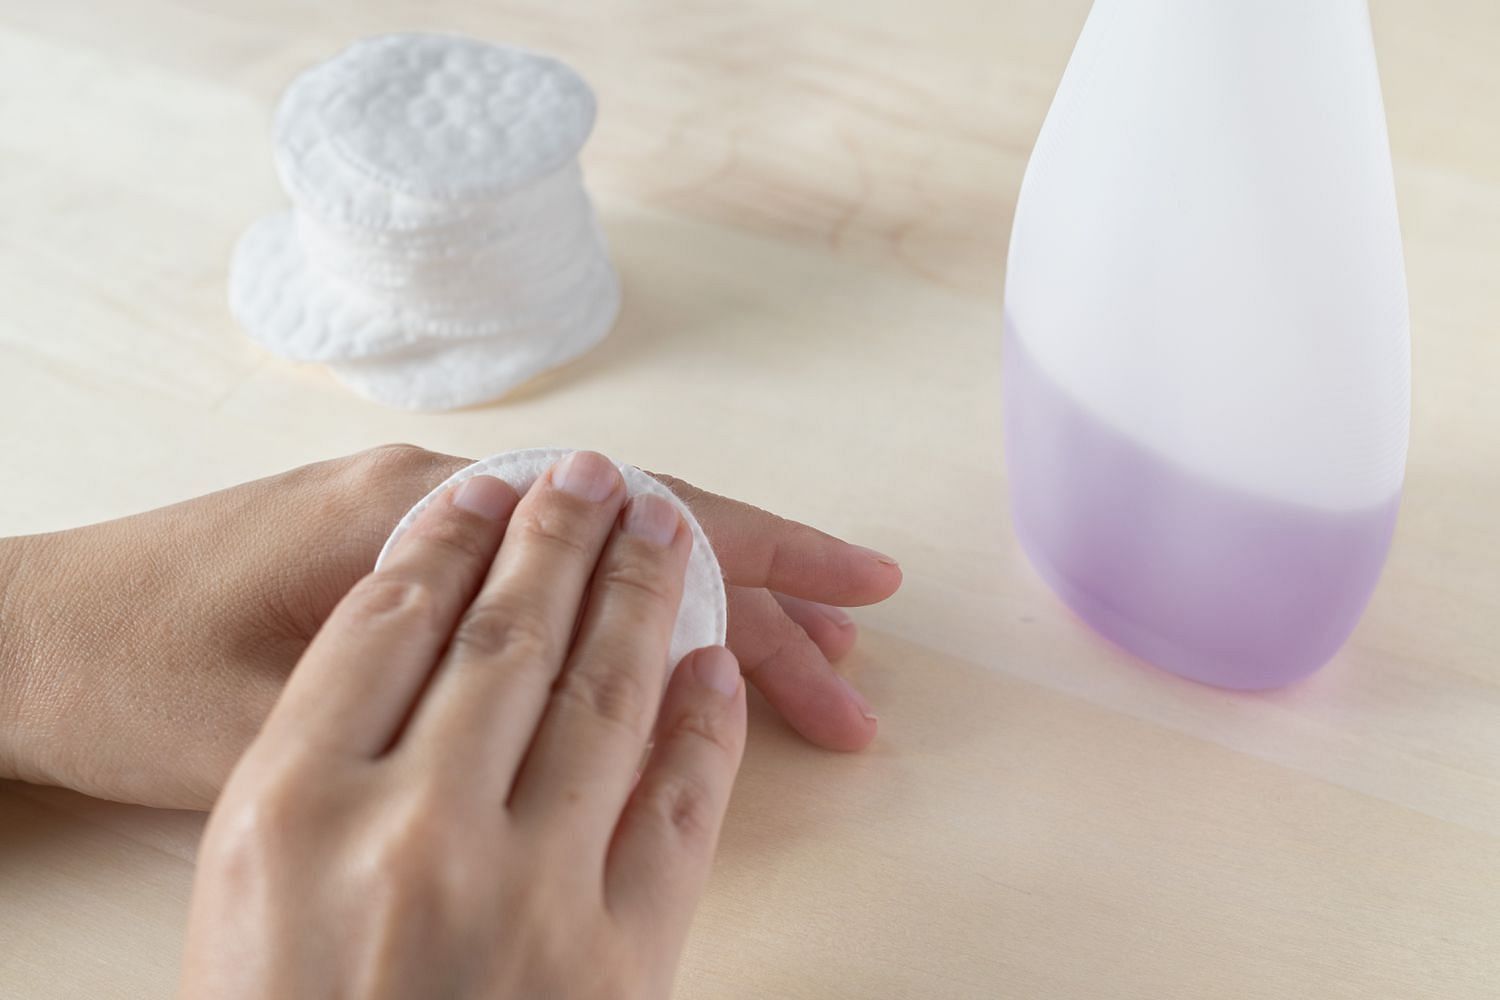 Methods to remove glue from skin (Image via Getty Images)